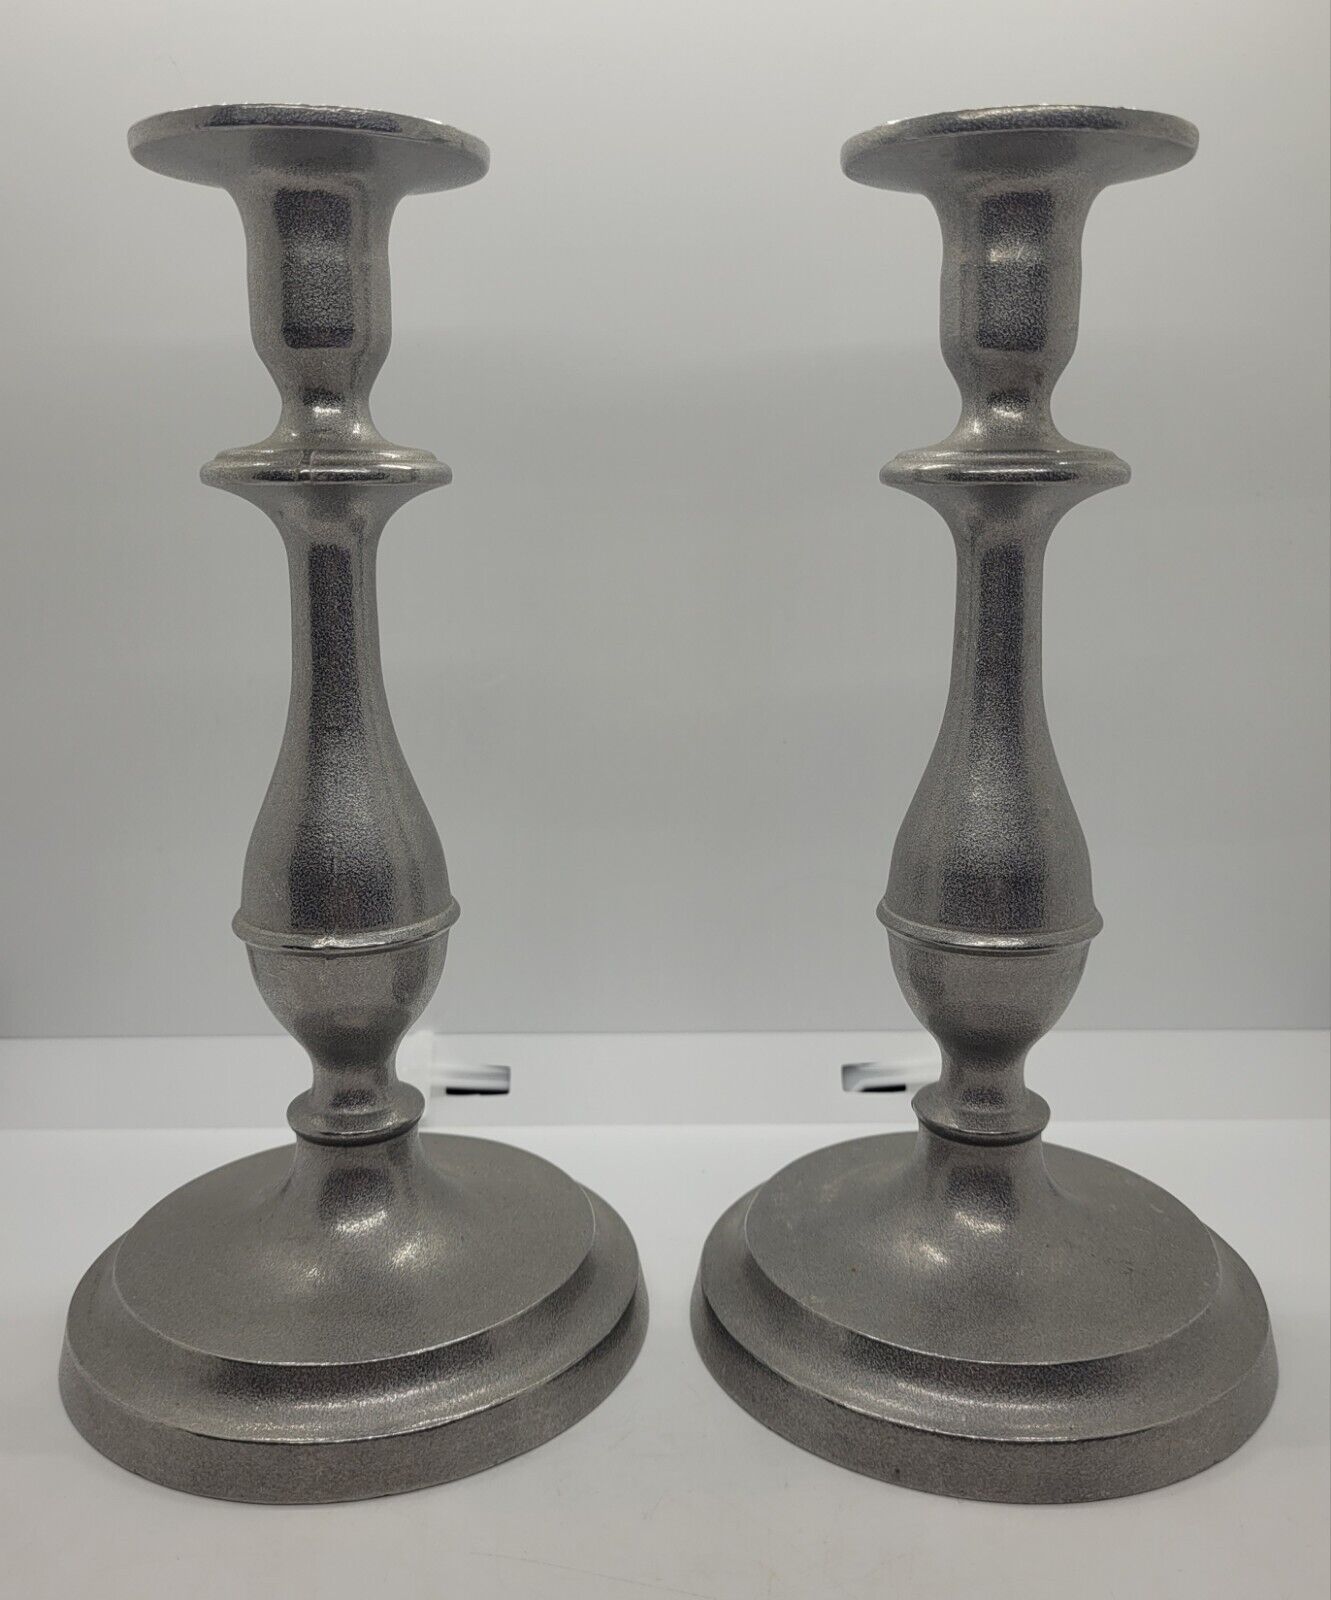 Vintage Wilton Armetale Pewter Candle Stick Holder Pair 9 inch